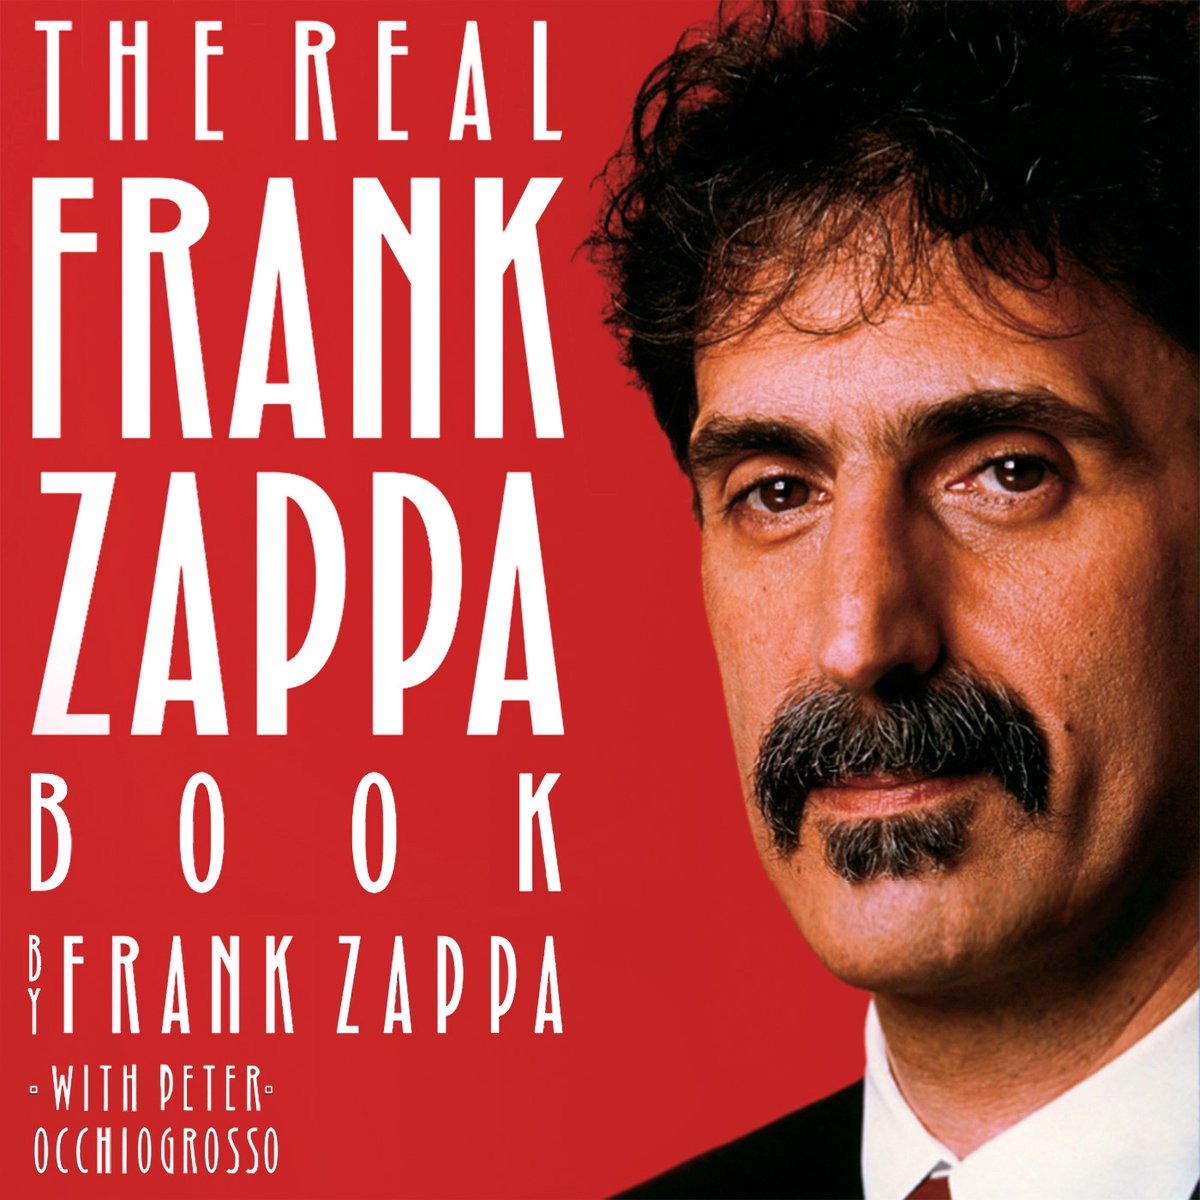 In celebration of FZ’s birthday, the audio version of 'The Real Frank Zappa Book' is available for pre-order now only on @audible_com! Coming January 19 with @AhmetZappa voicing the book. Pre-order here: adbl.co/RealFrankZappa